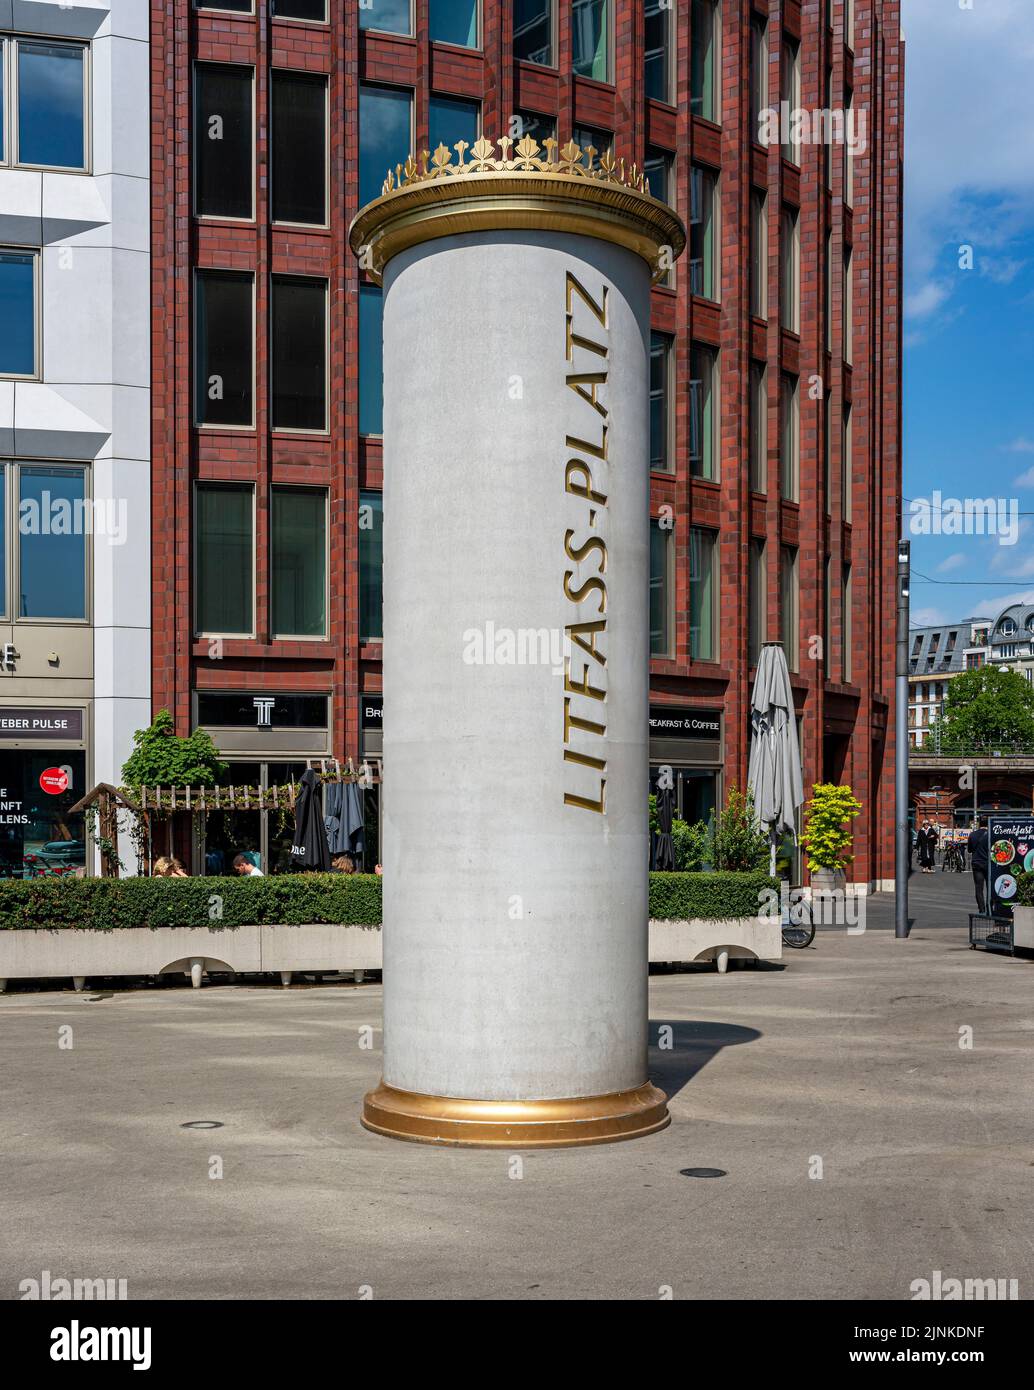 Litfass Square With A Concrete Litfass Column In Berlin Mitte, Germany Stock Photo